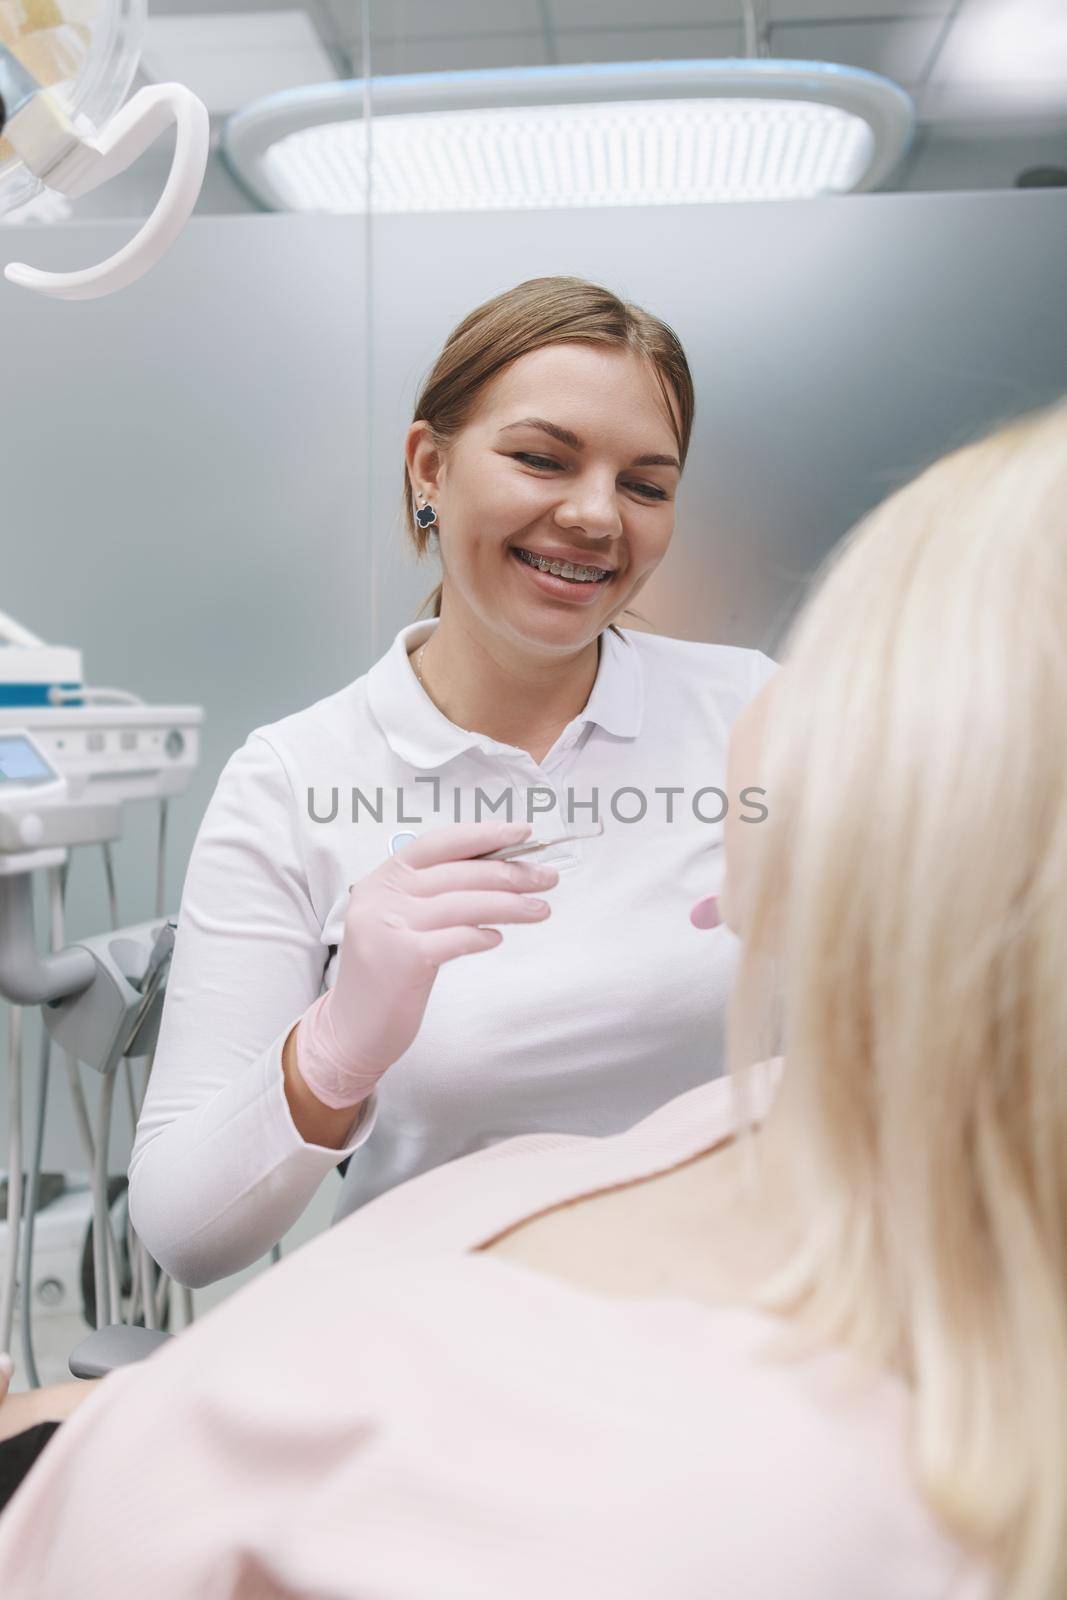 Vertical shot of a female dentist laughing, talking to patient